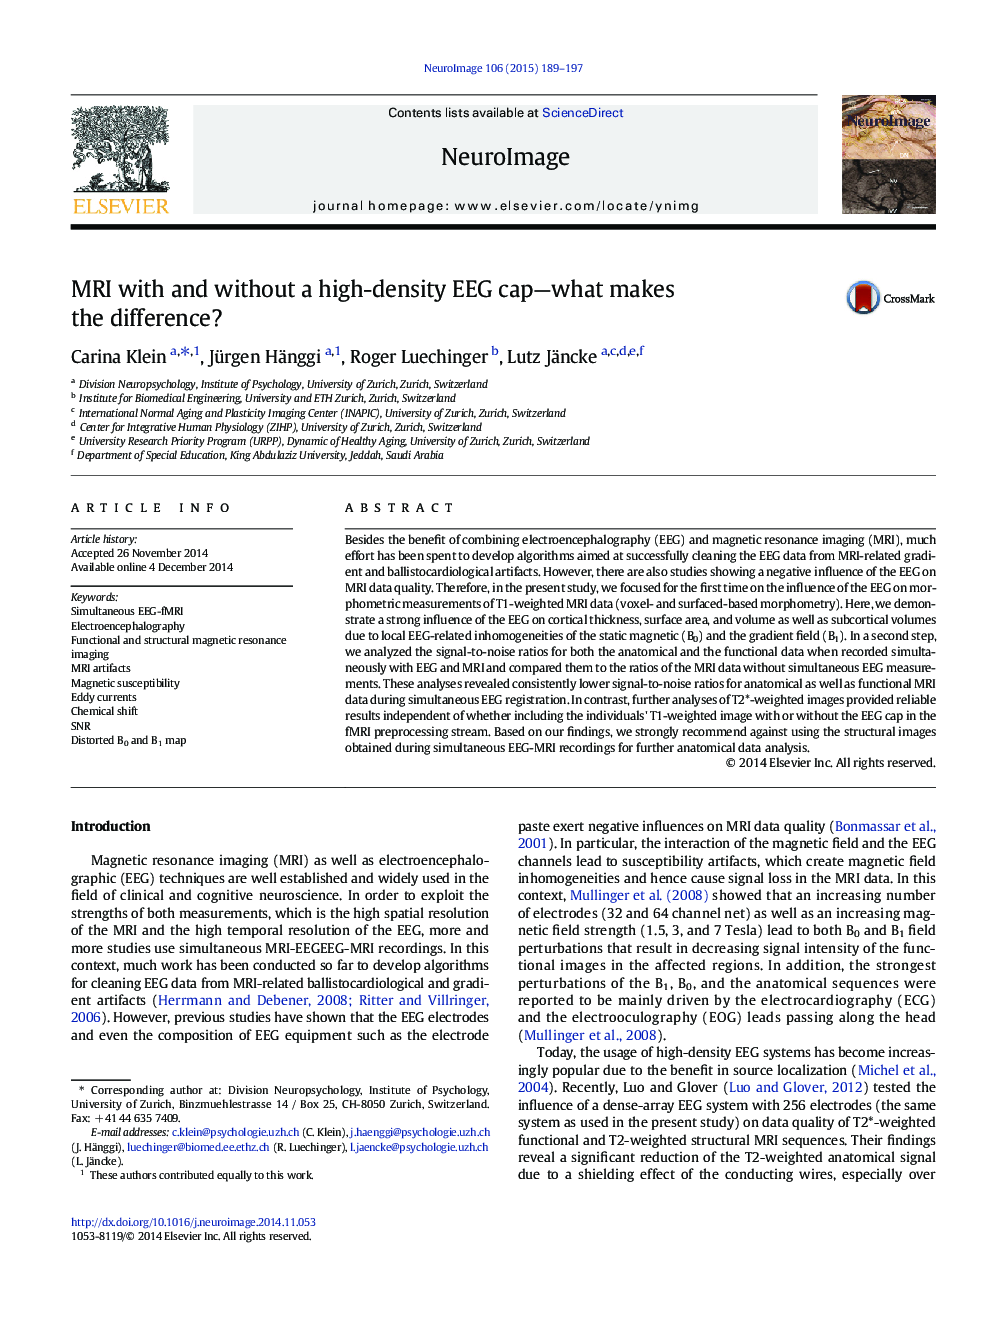 MRI with and without a high-density EEG cap-what makes the difference?